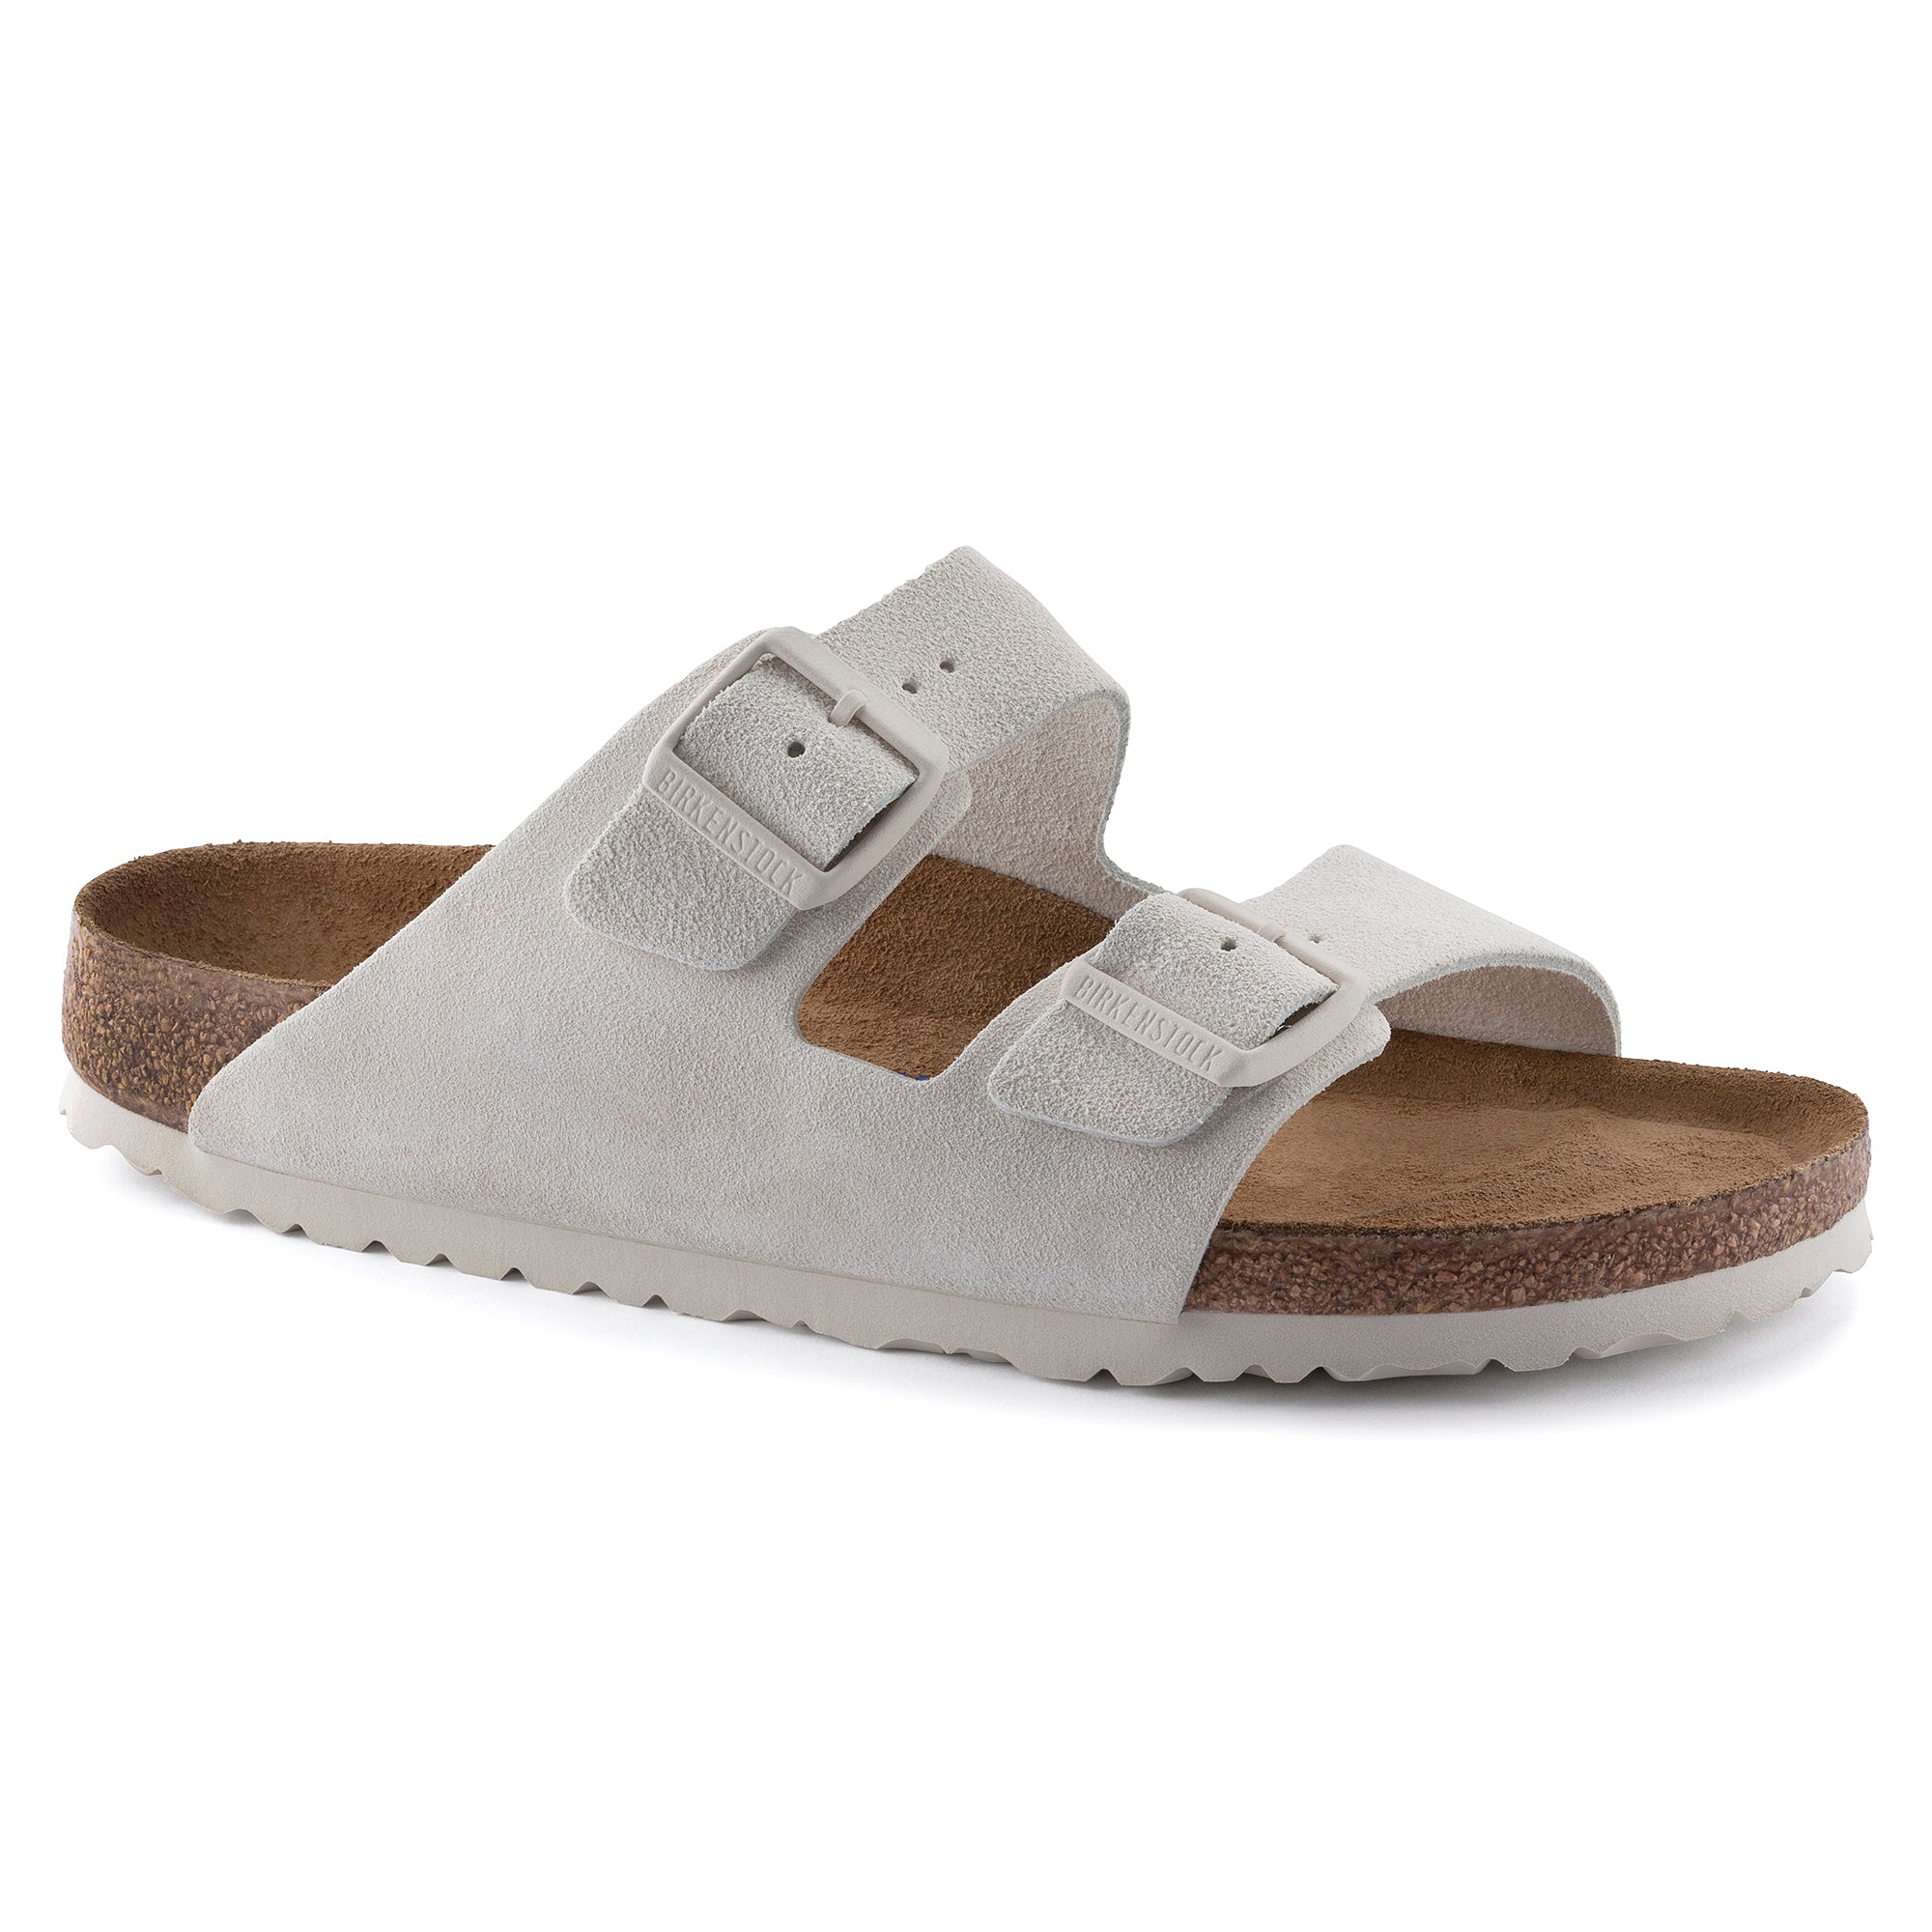 Birkenstock Limited Edition Arizona Soft Footbed antique white suede